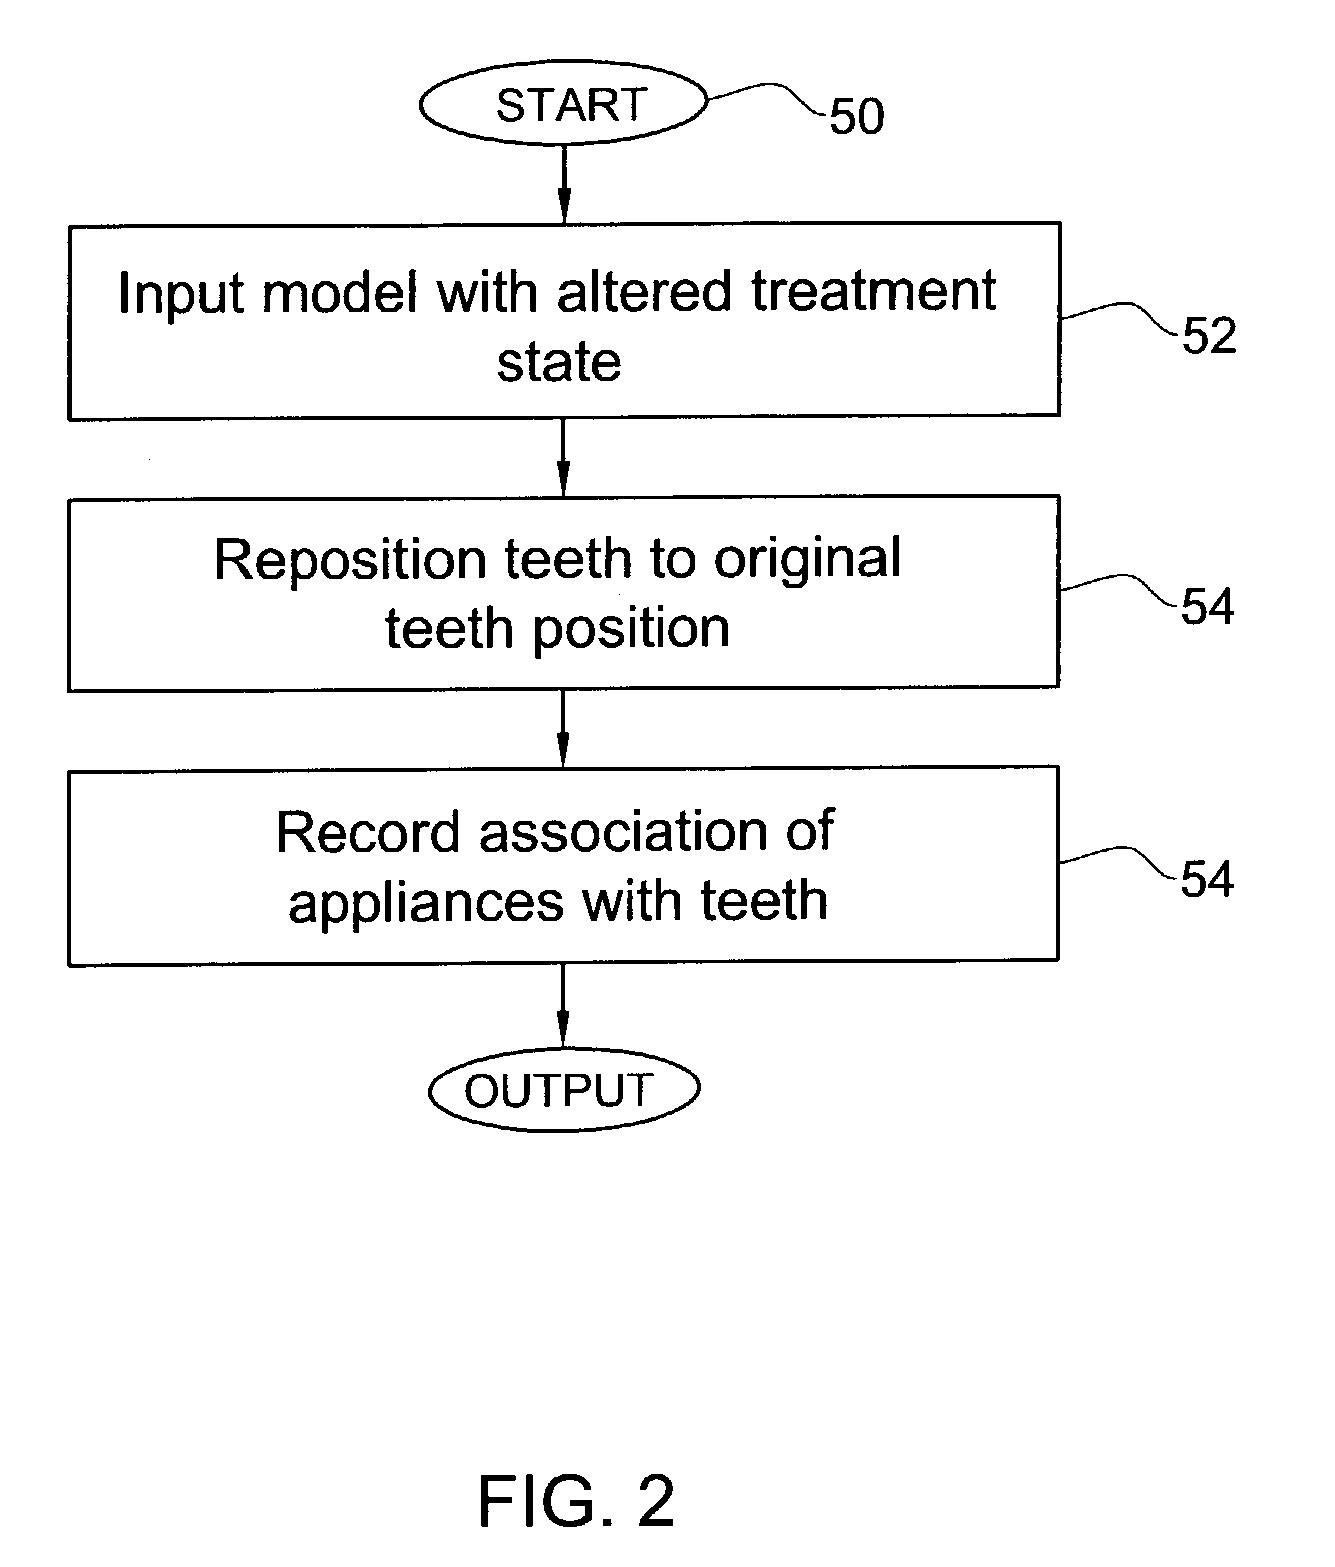 Method and system for assessing the outcome of an orthodontic treatment